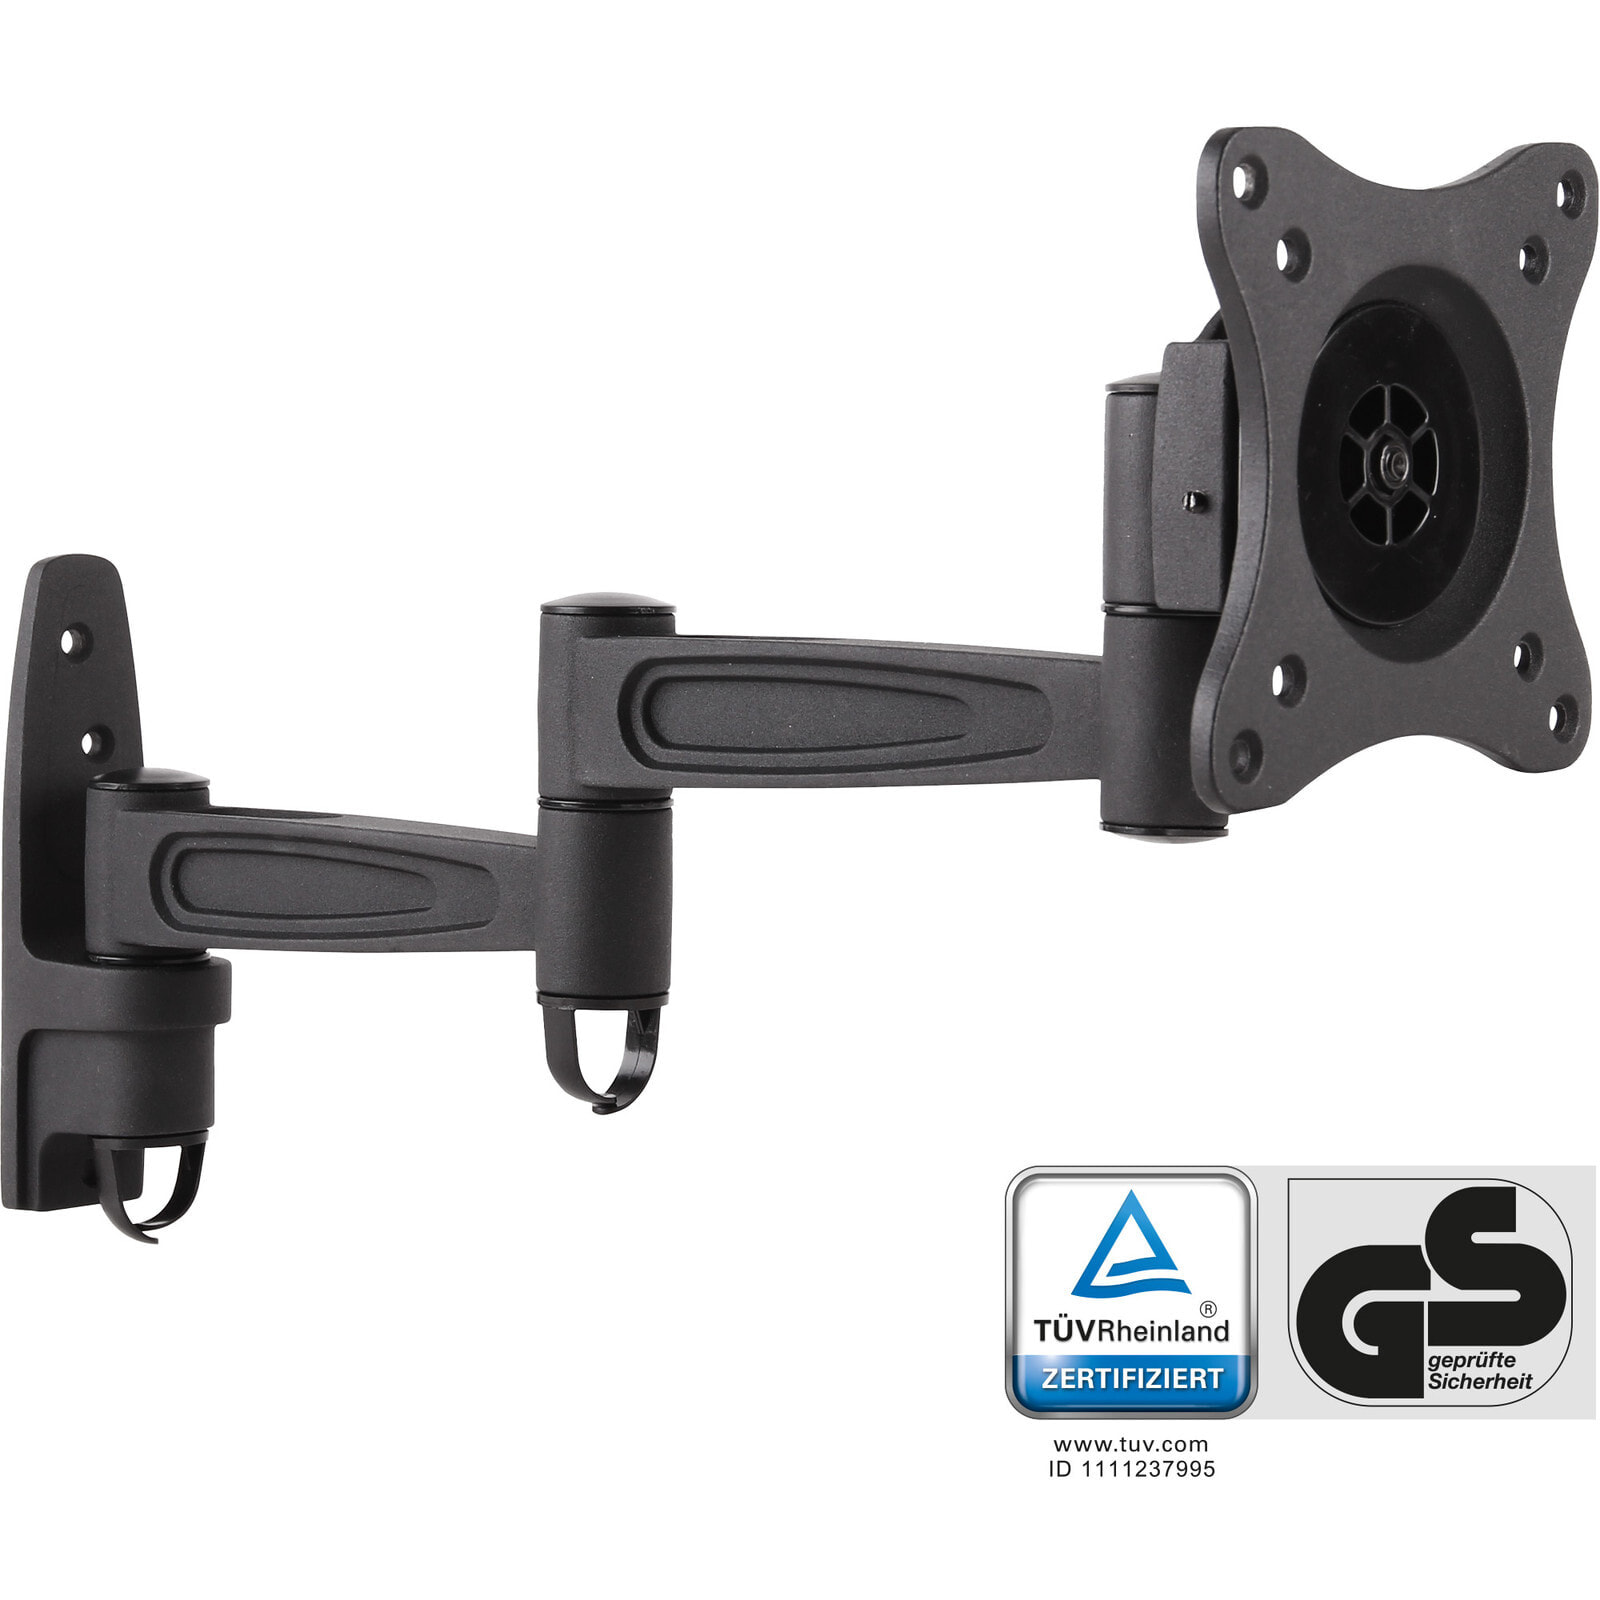 Wall mount - for monitors up to 69cm (27